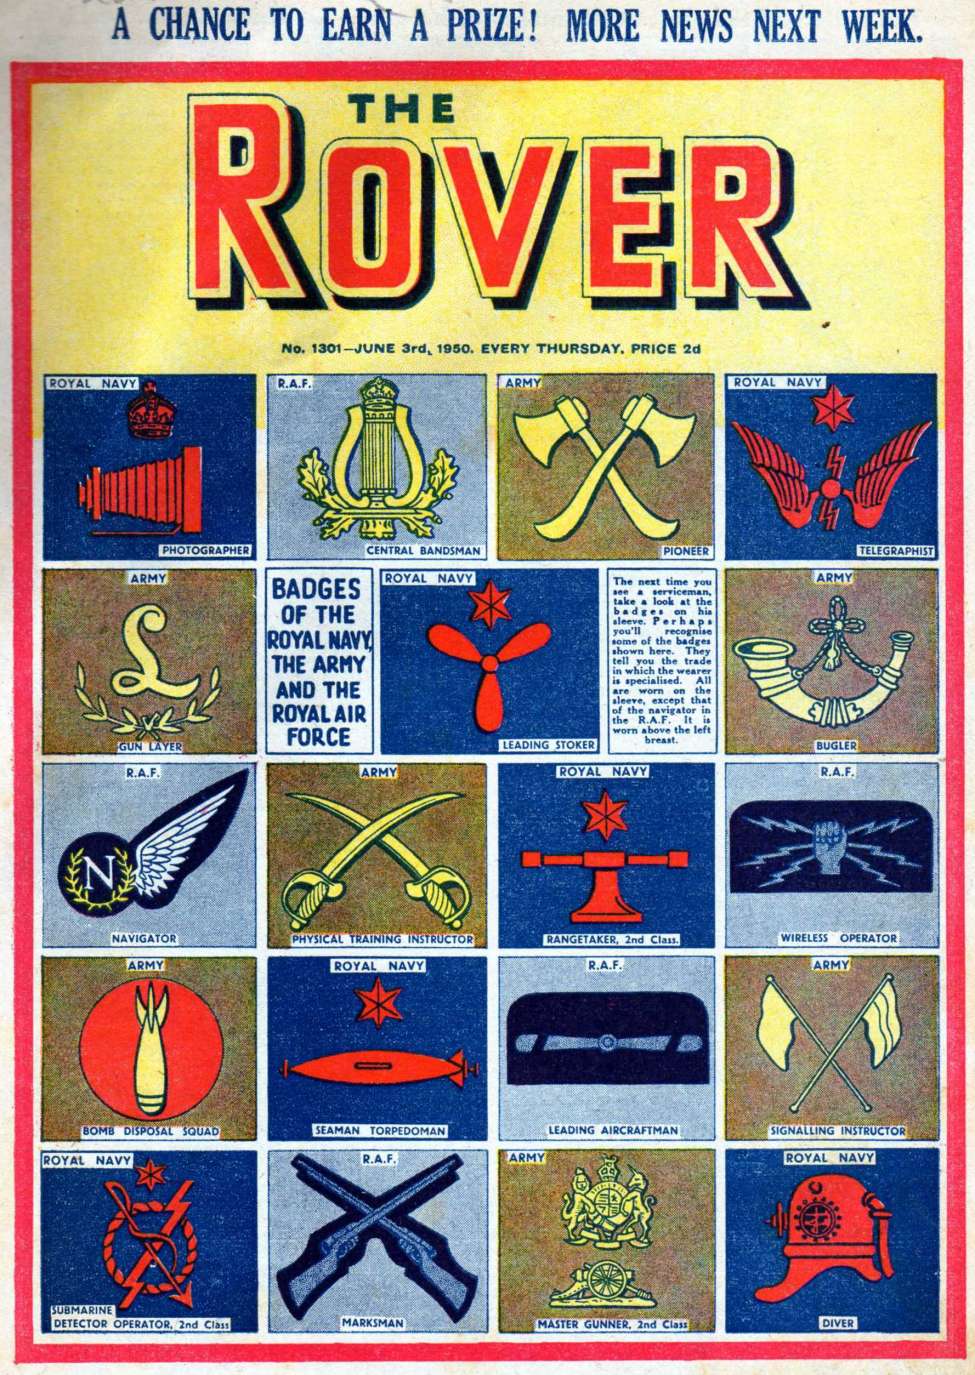 Book Cover For The Rover 1301